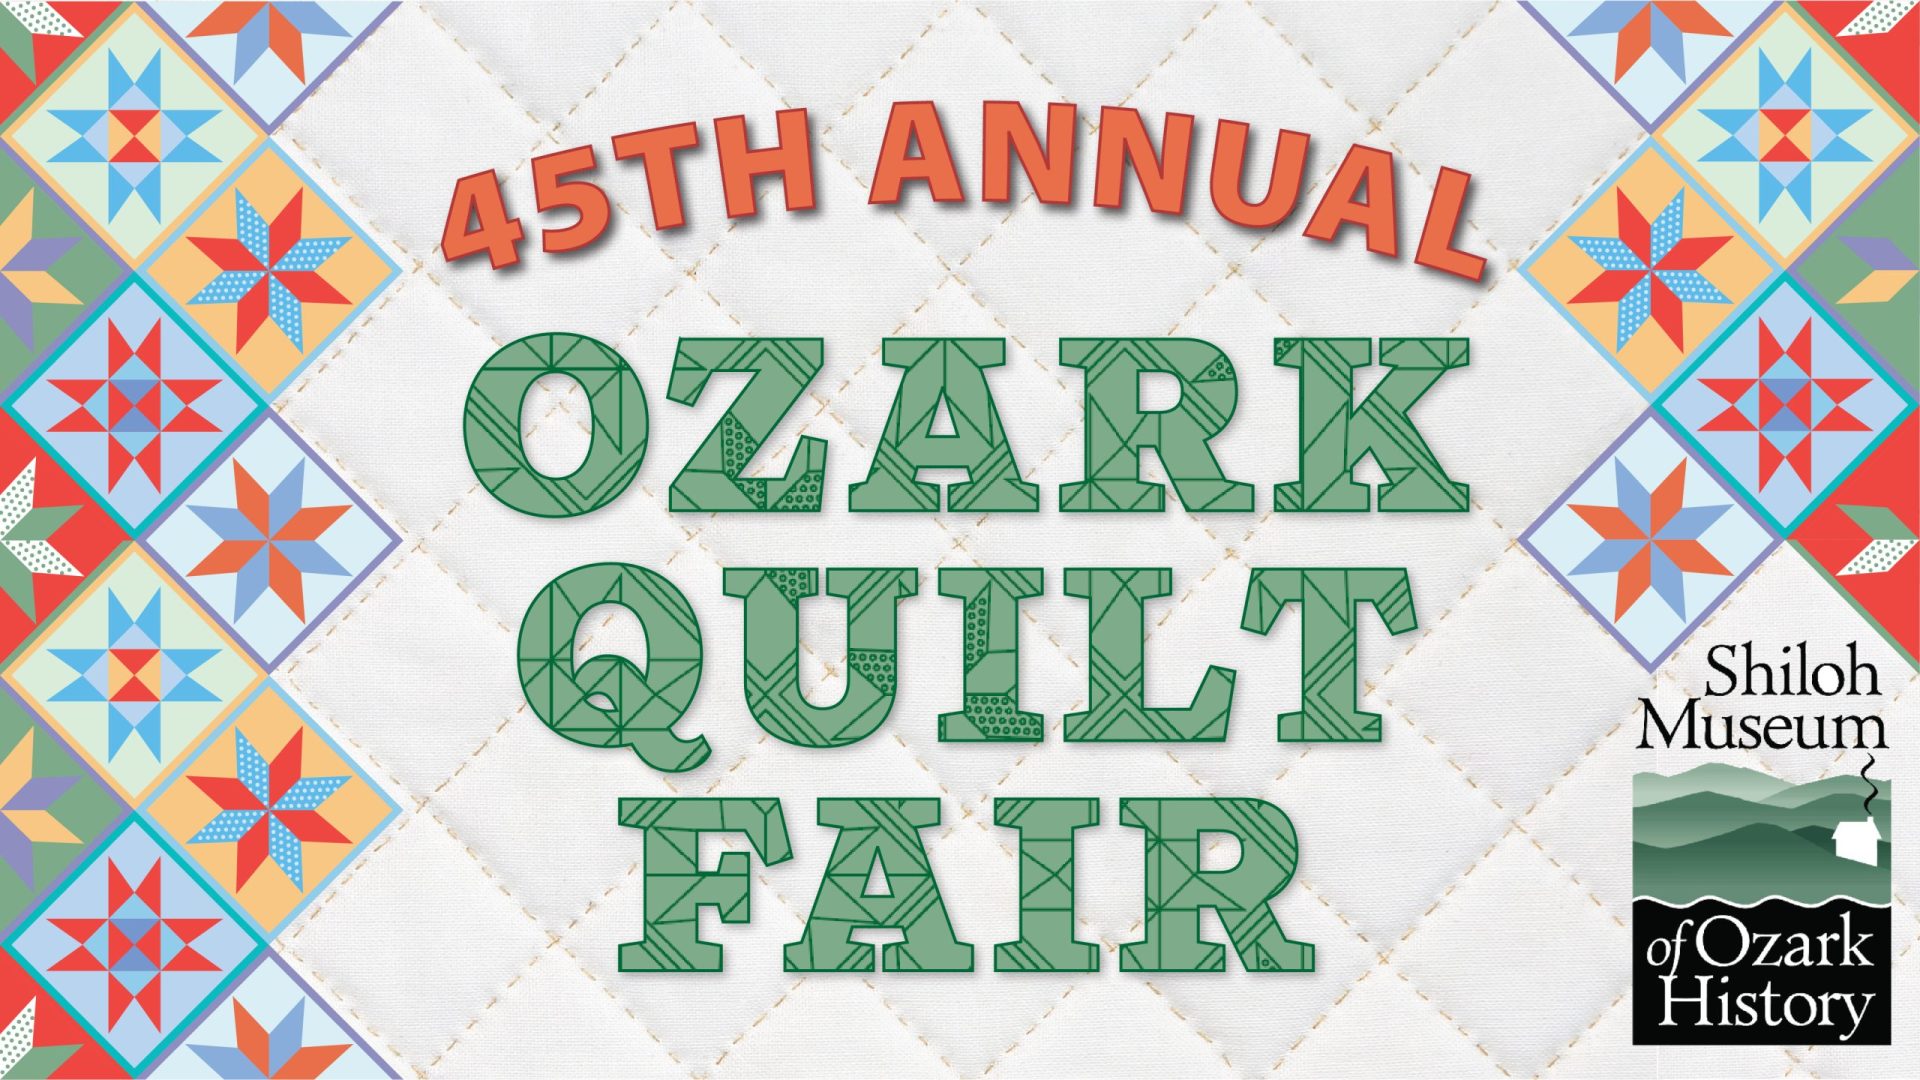 Quilted pattern in background with quilt star patterns in many colors around the edges. Text in center says 45th Annual Ozark Quilt Fair in orange and green.